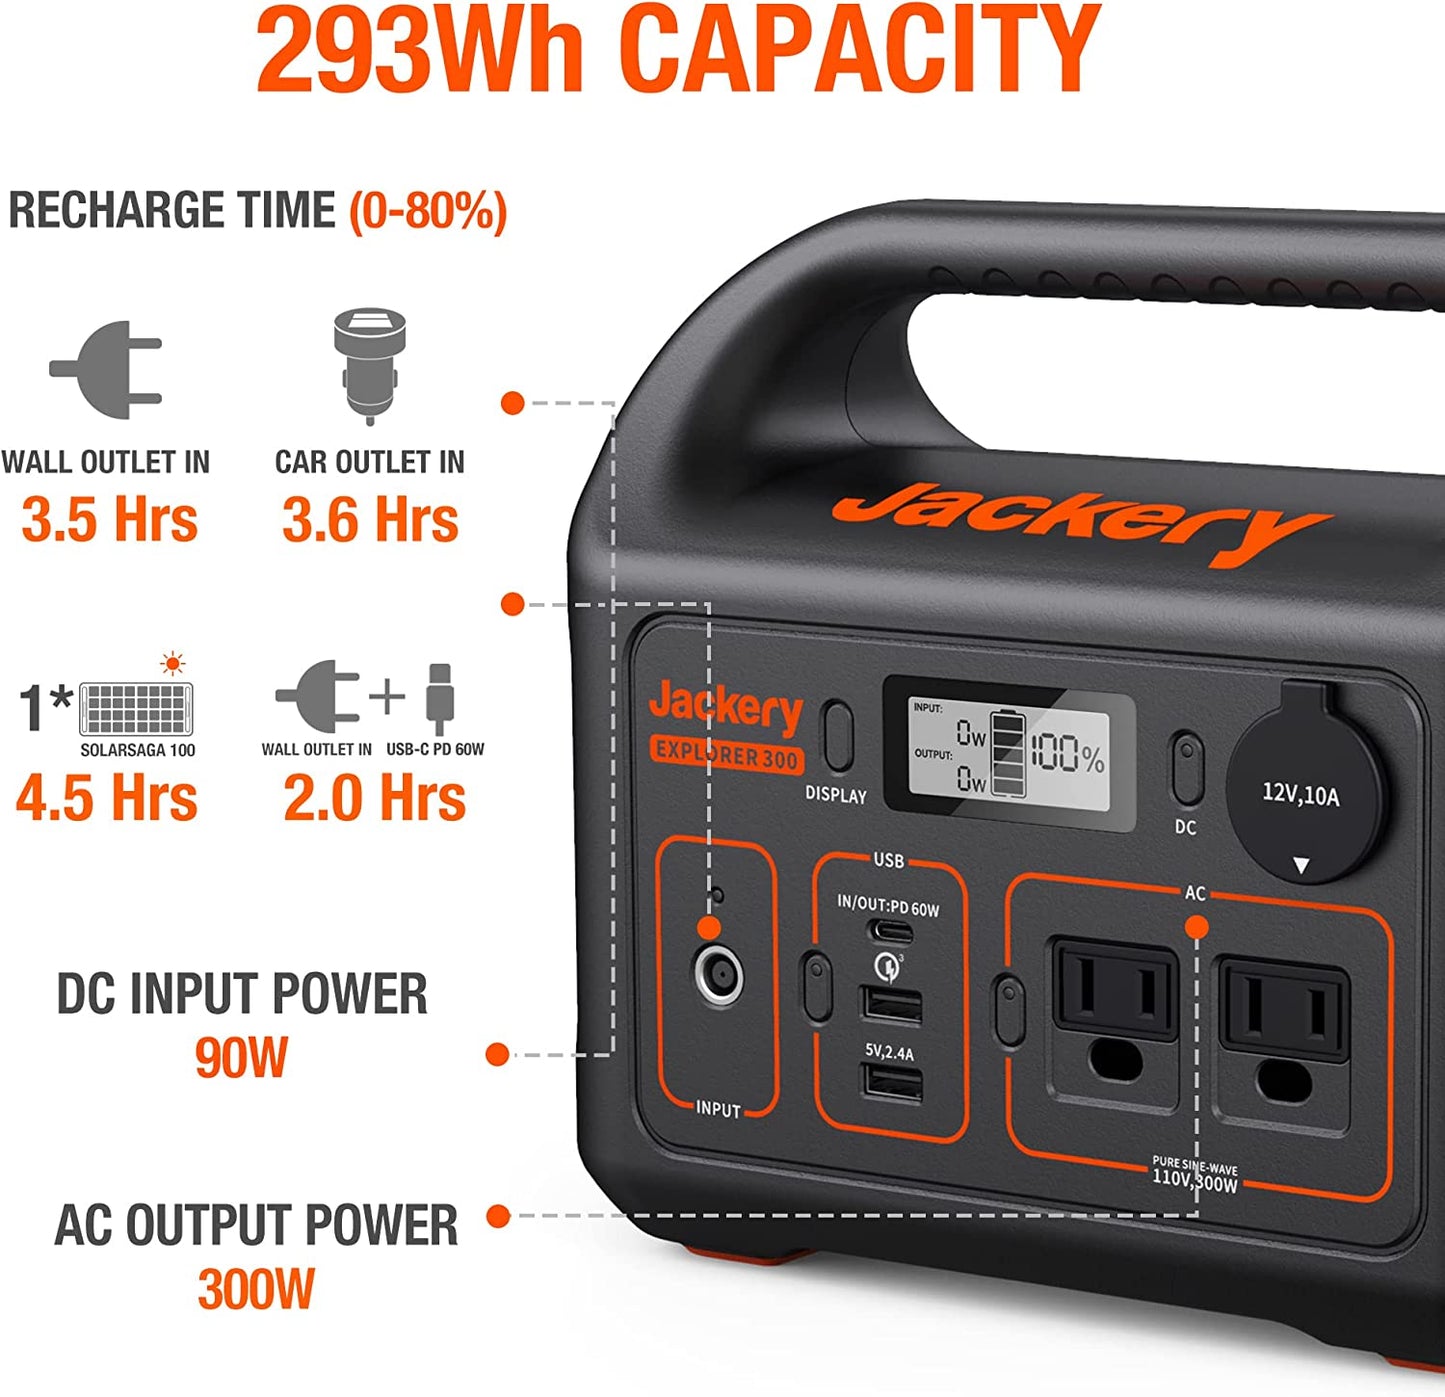 Detailed product features of a Jackery portable power station. The text headline reads, '293Wh capacity.'